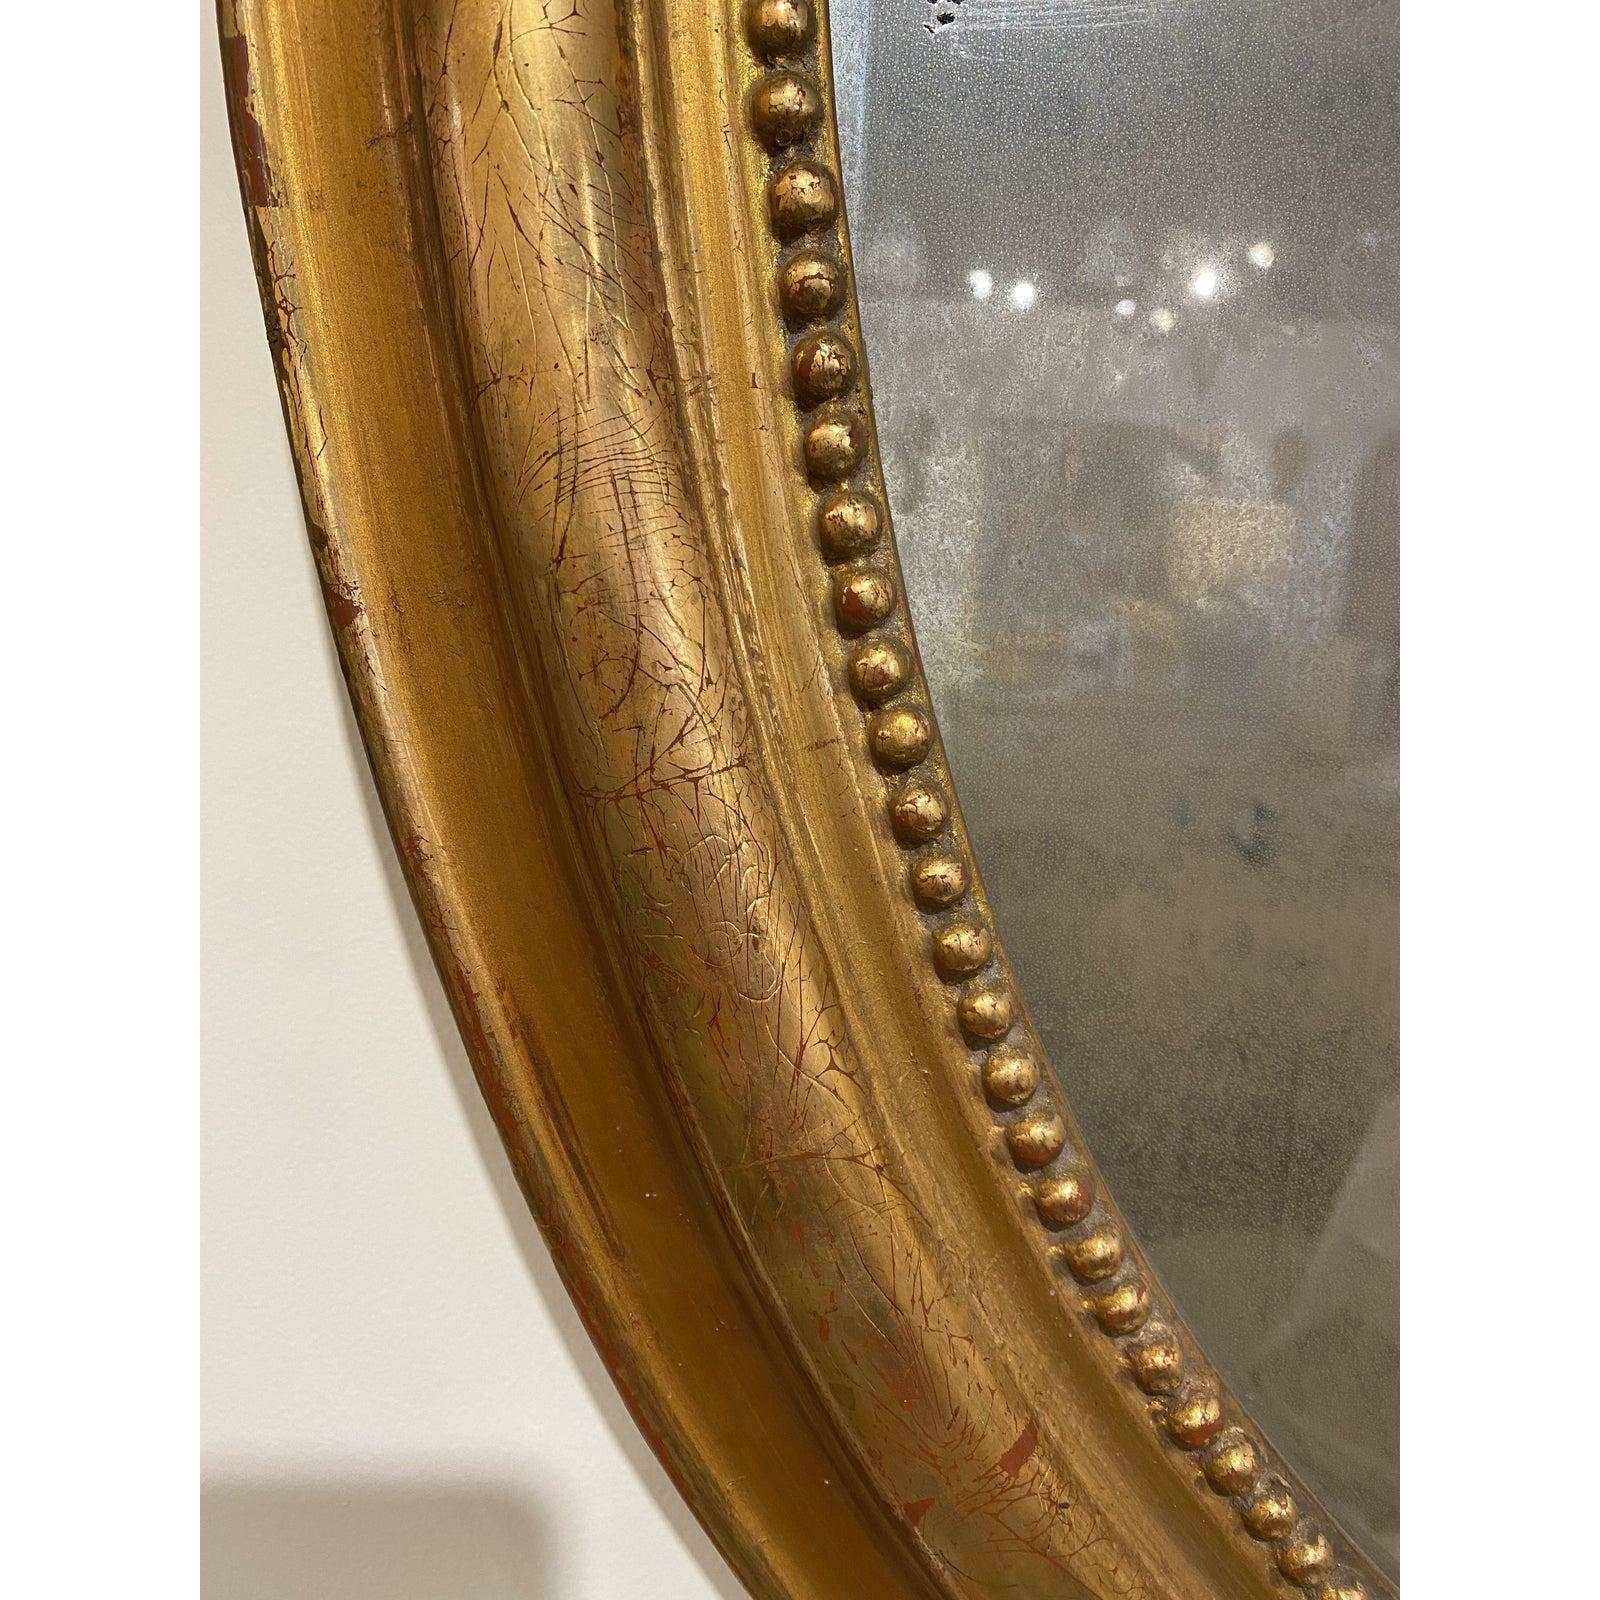 French oval 19th c gilt mirror with carved Laurel leaves. Original mirror. Purchased in Southern France.